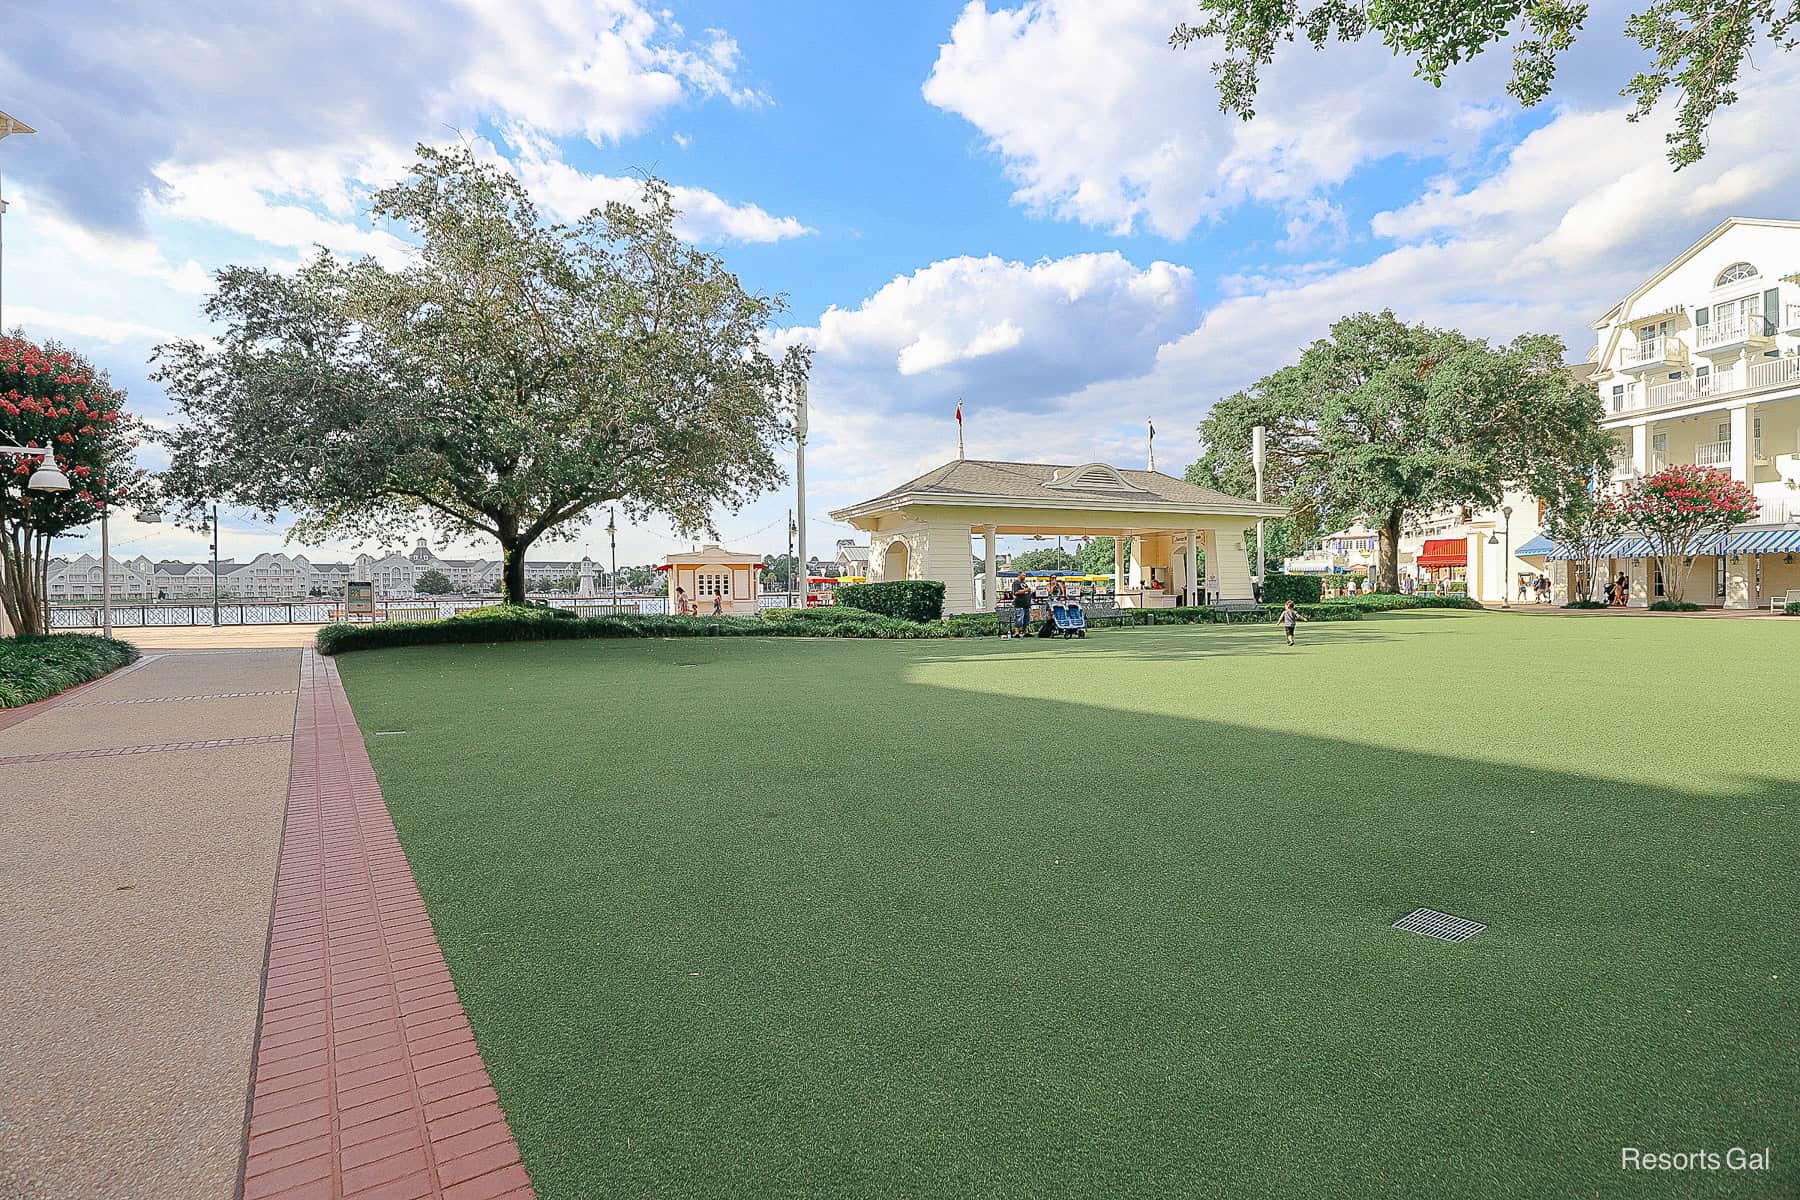 the green lawn at the Boardwalk 